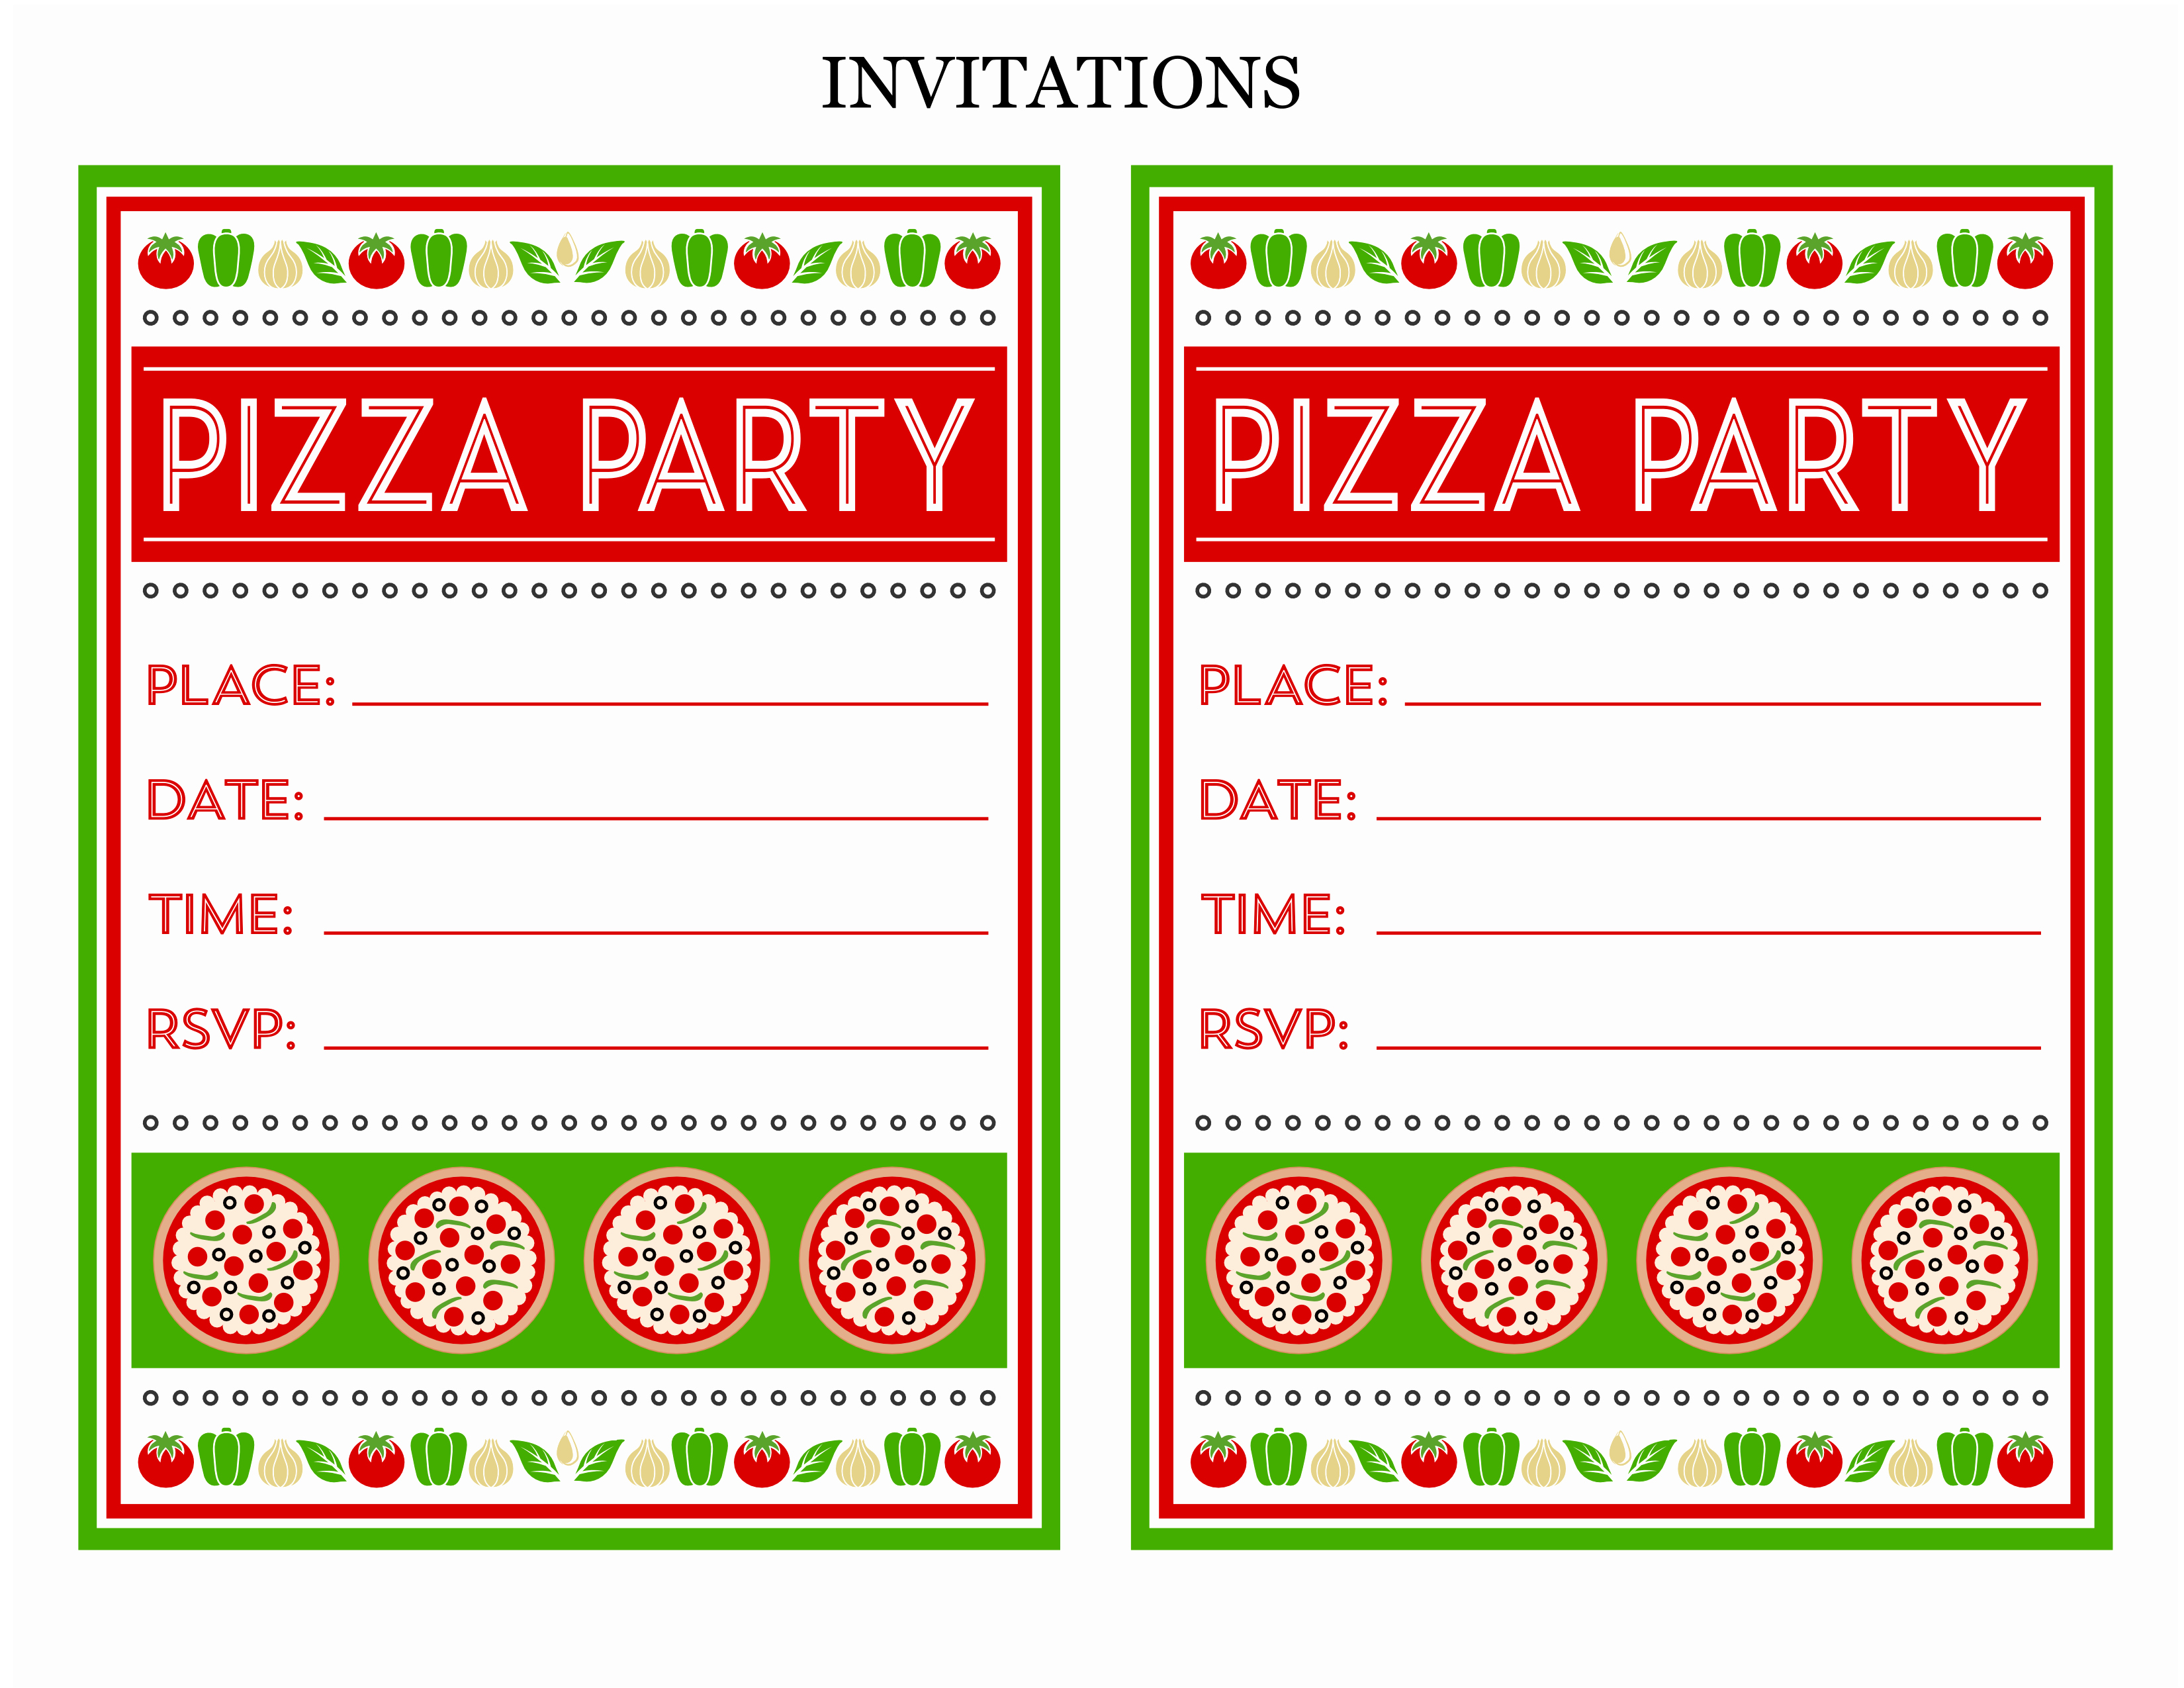 Pizza Party Invites Template Best Of Free Pizza Party Printables From Printabelle